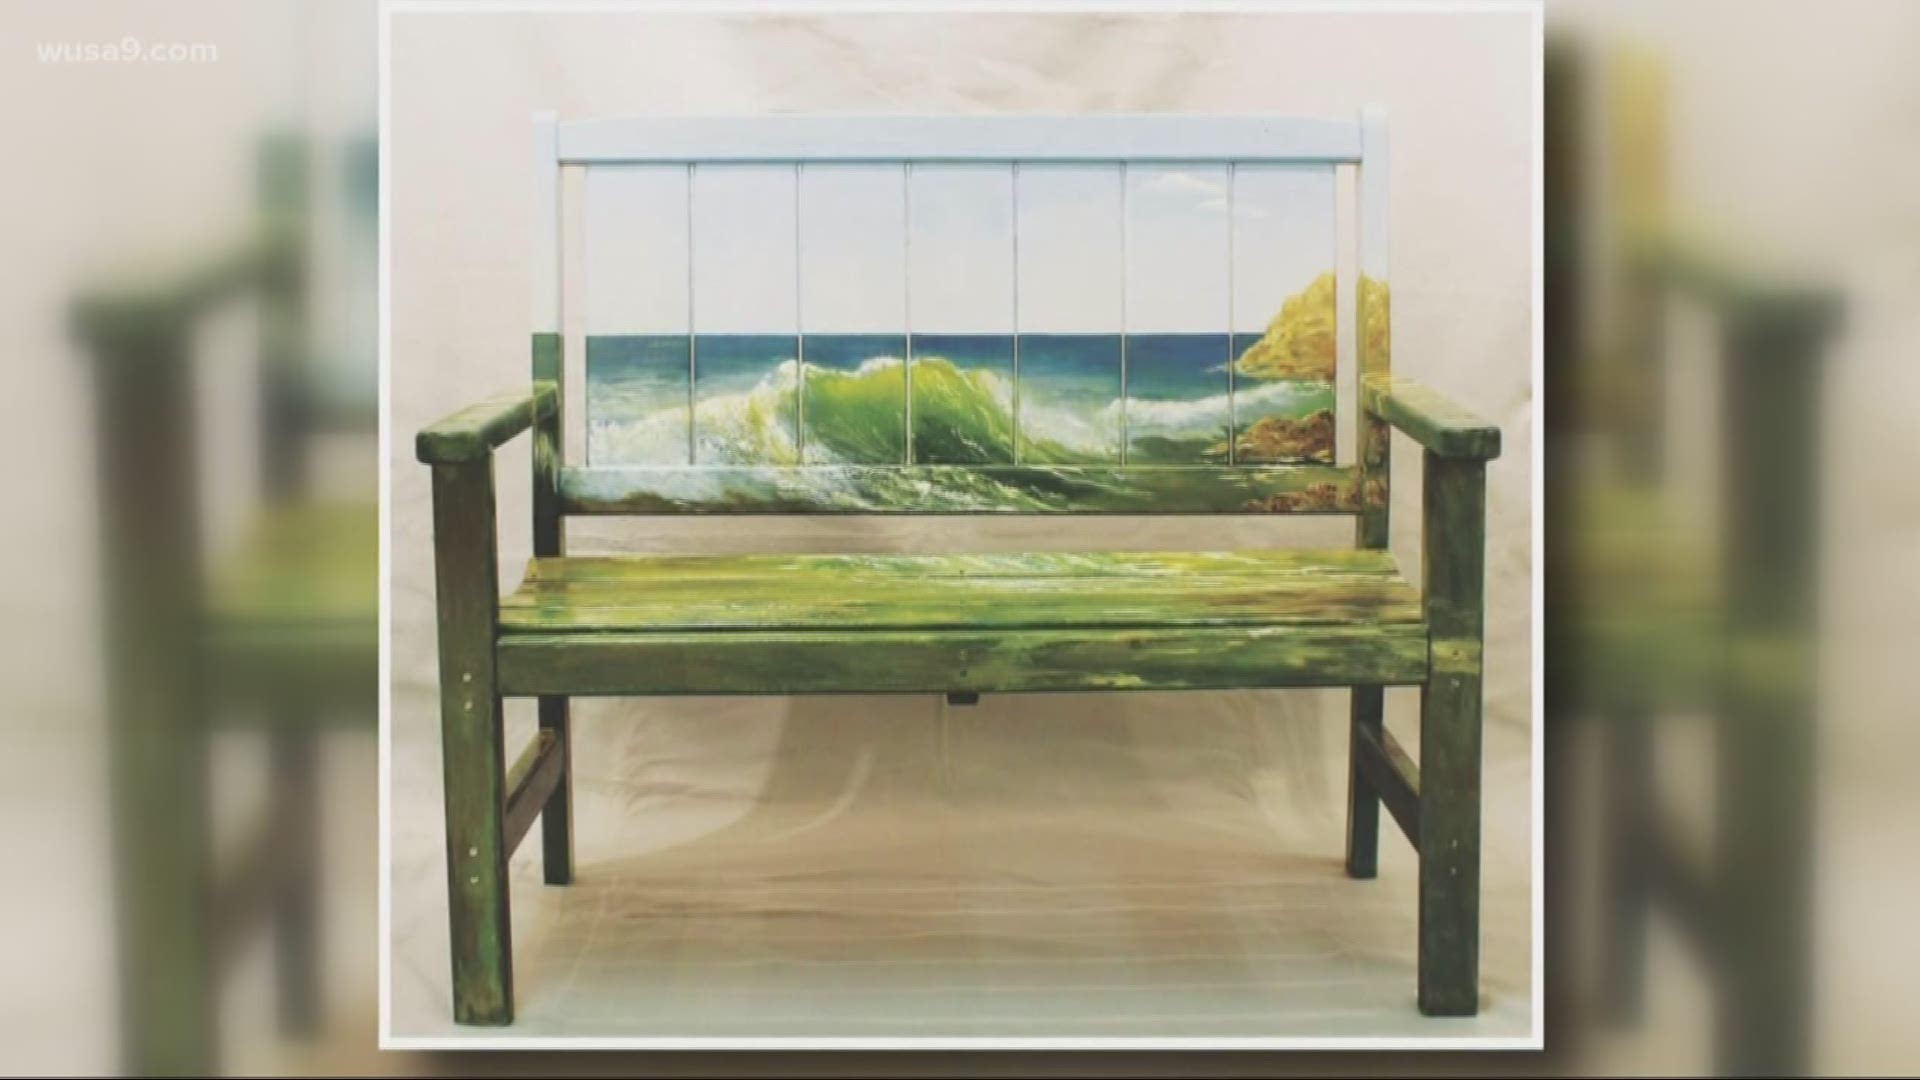 Mike Wise heads over to Vienna, VA to investigate the thefts of two benches painted by local artists.